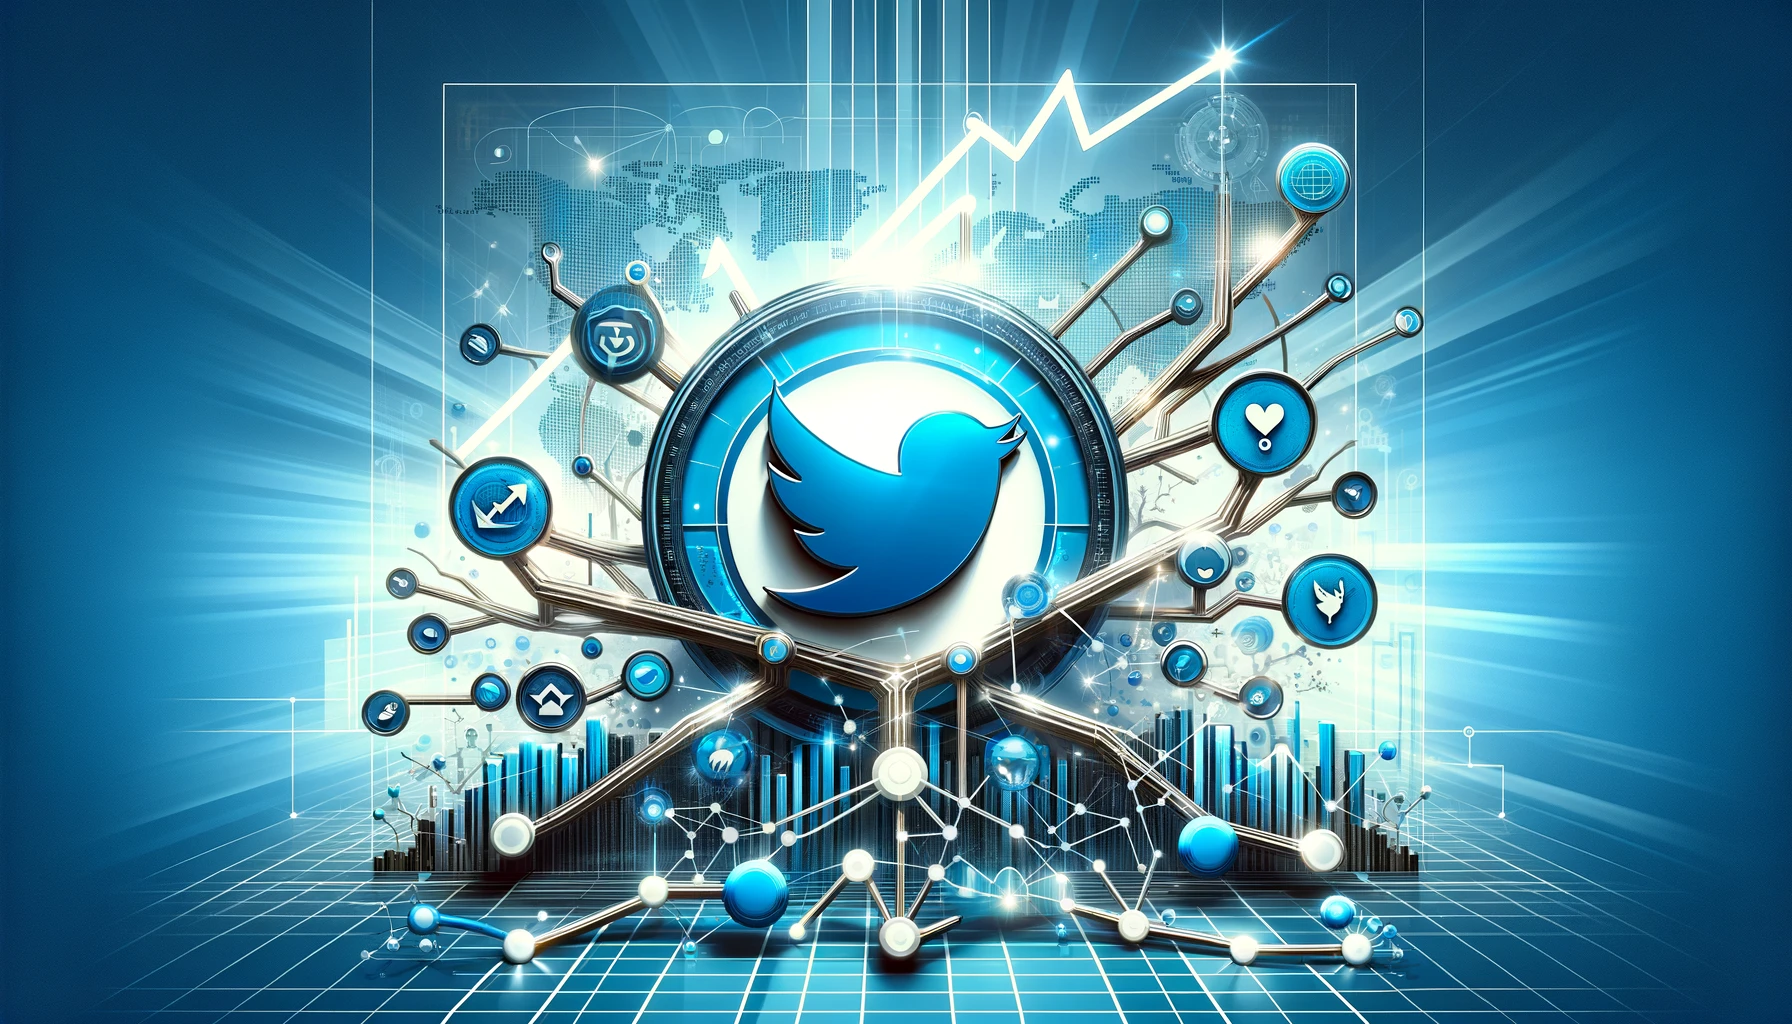 effective-twitter-networking-with-rank-panels-assistance-unlocking-social-media-success